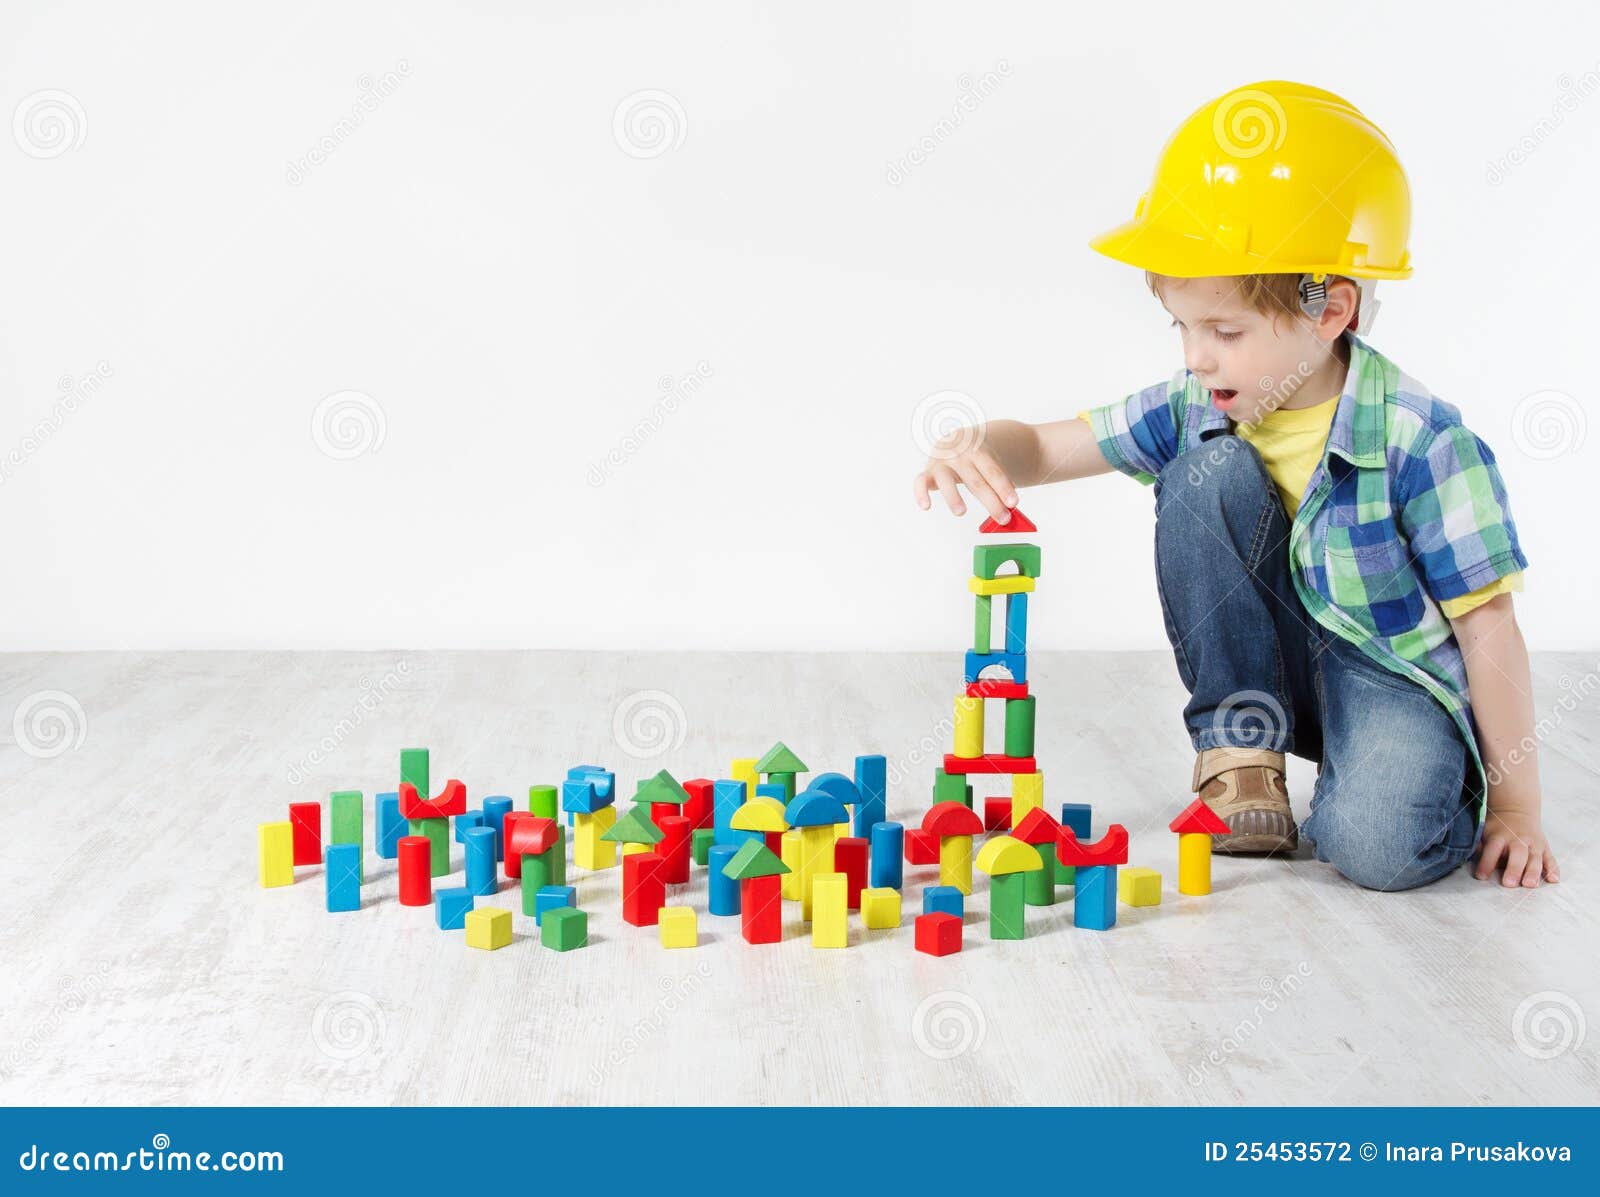 kids play room, child in hard hat playing building blocks toys